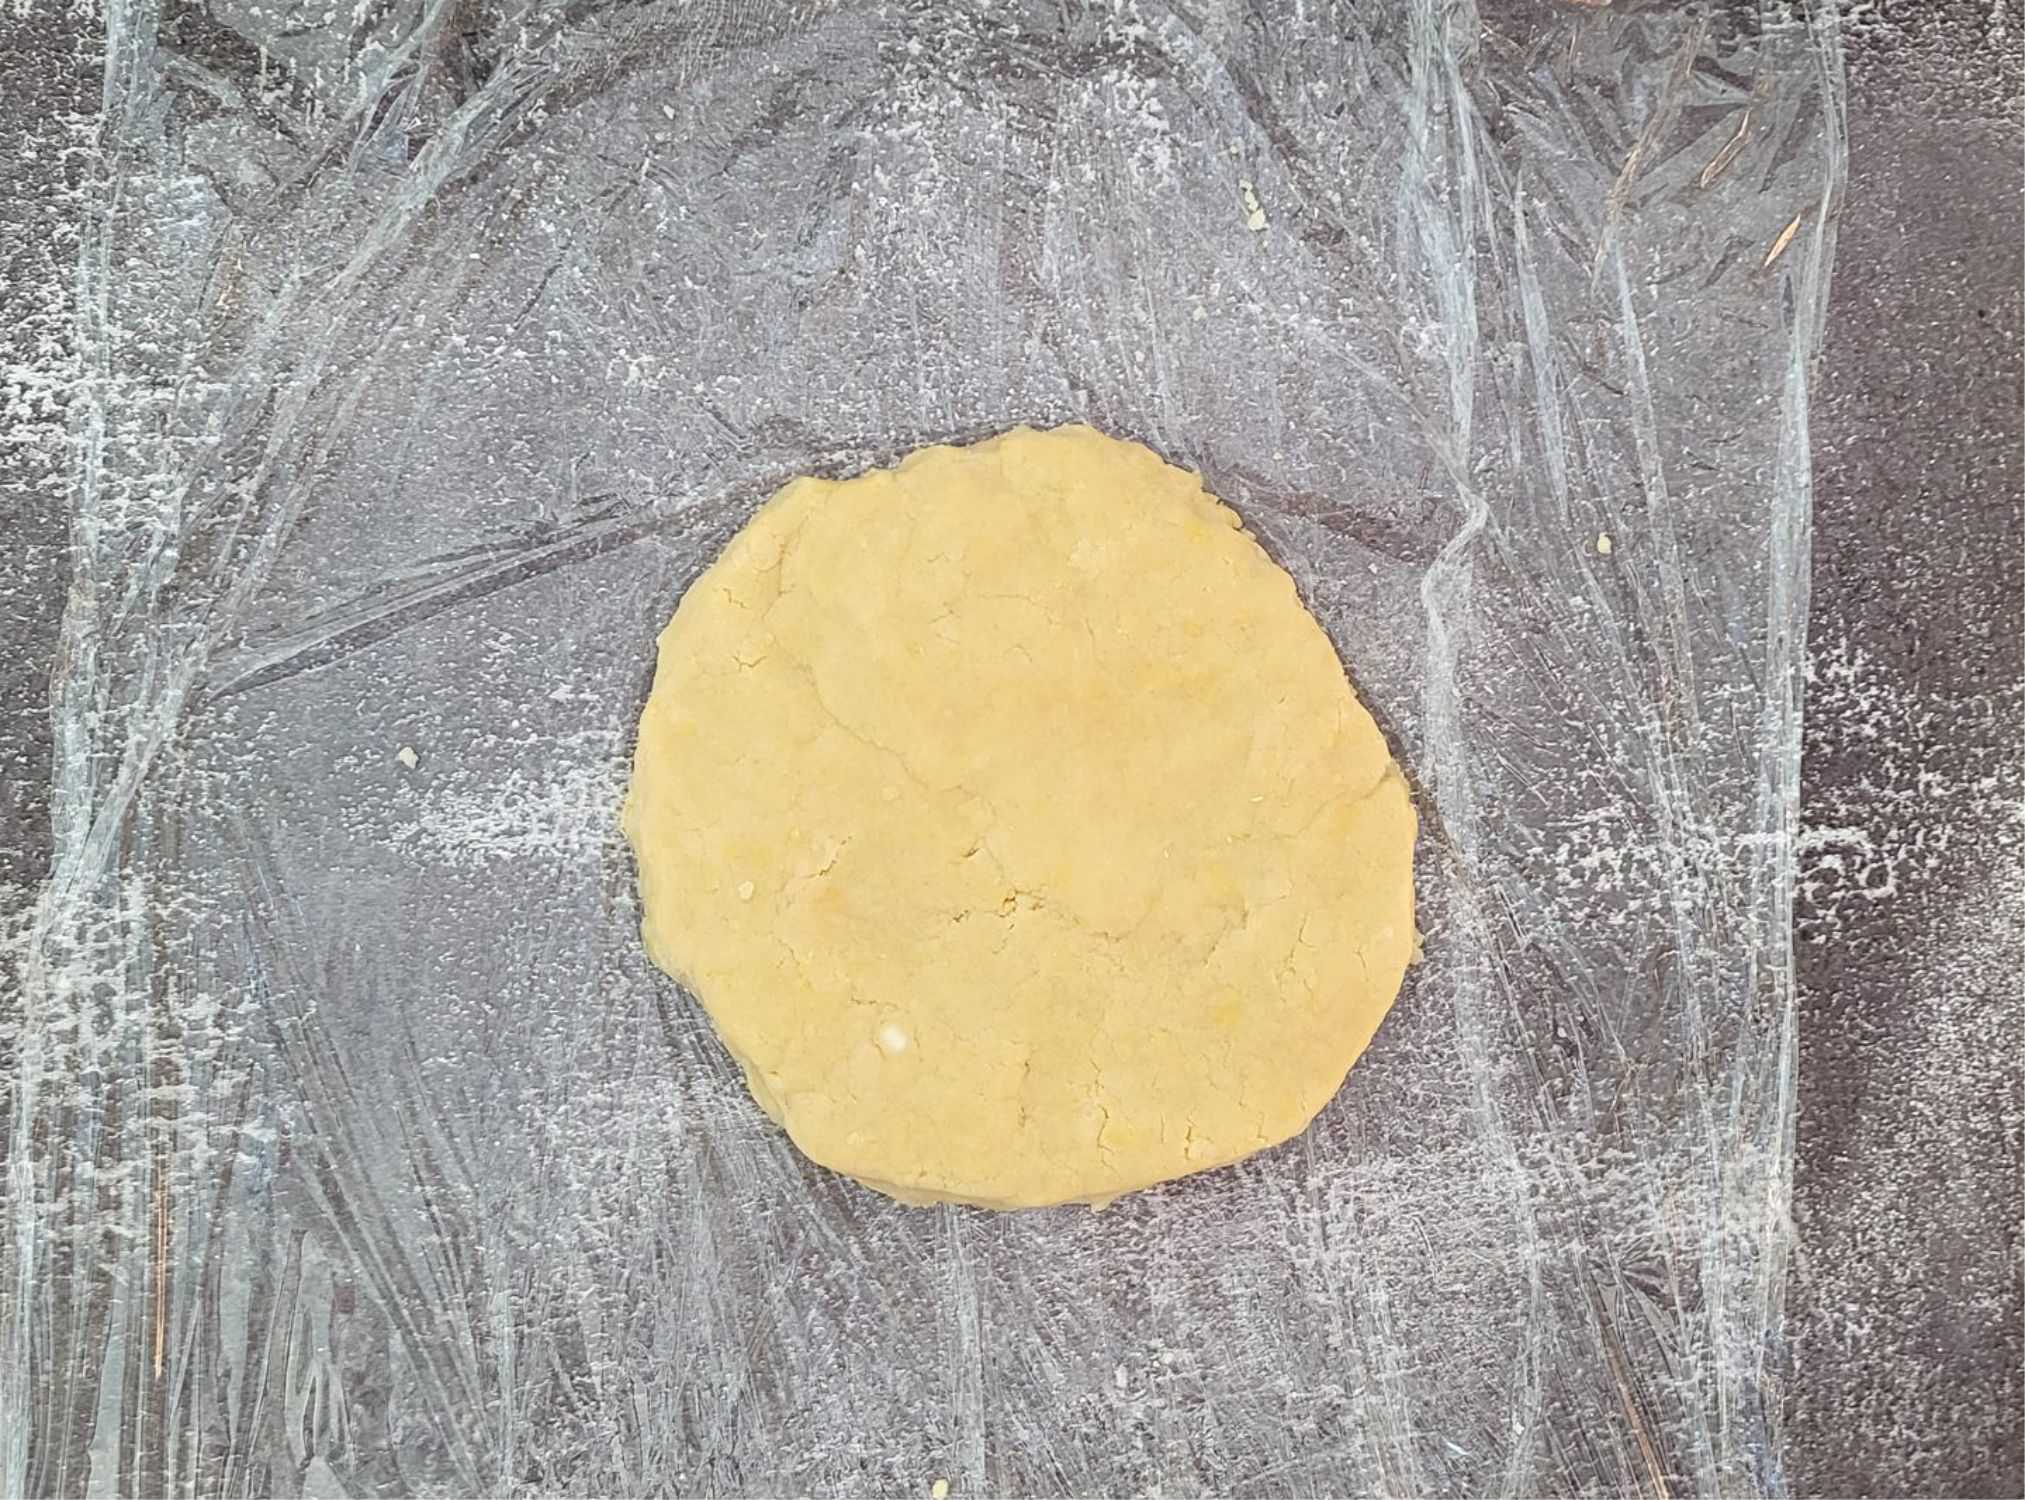 wrap sweet pie dough in plastic and refrigerate to rest dough